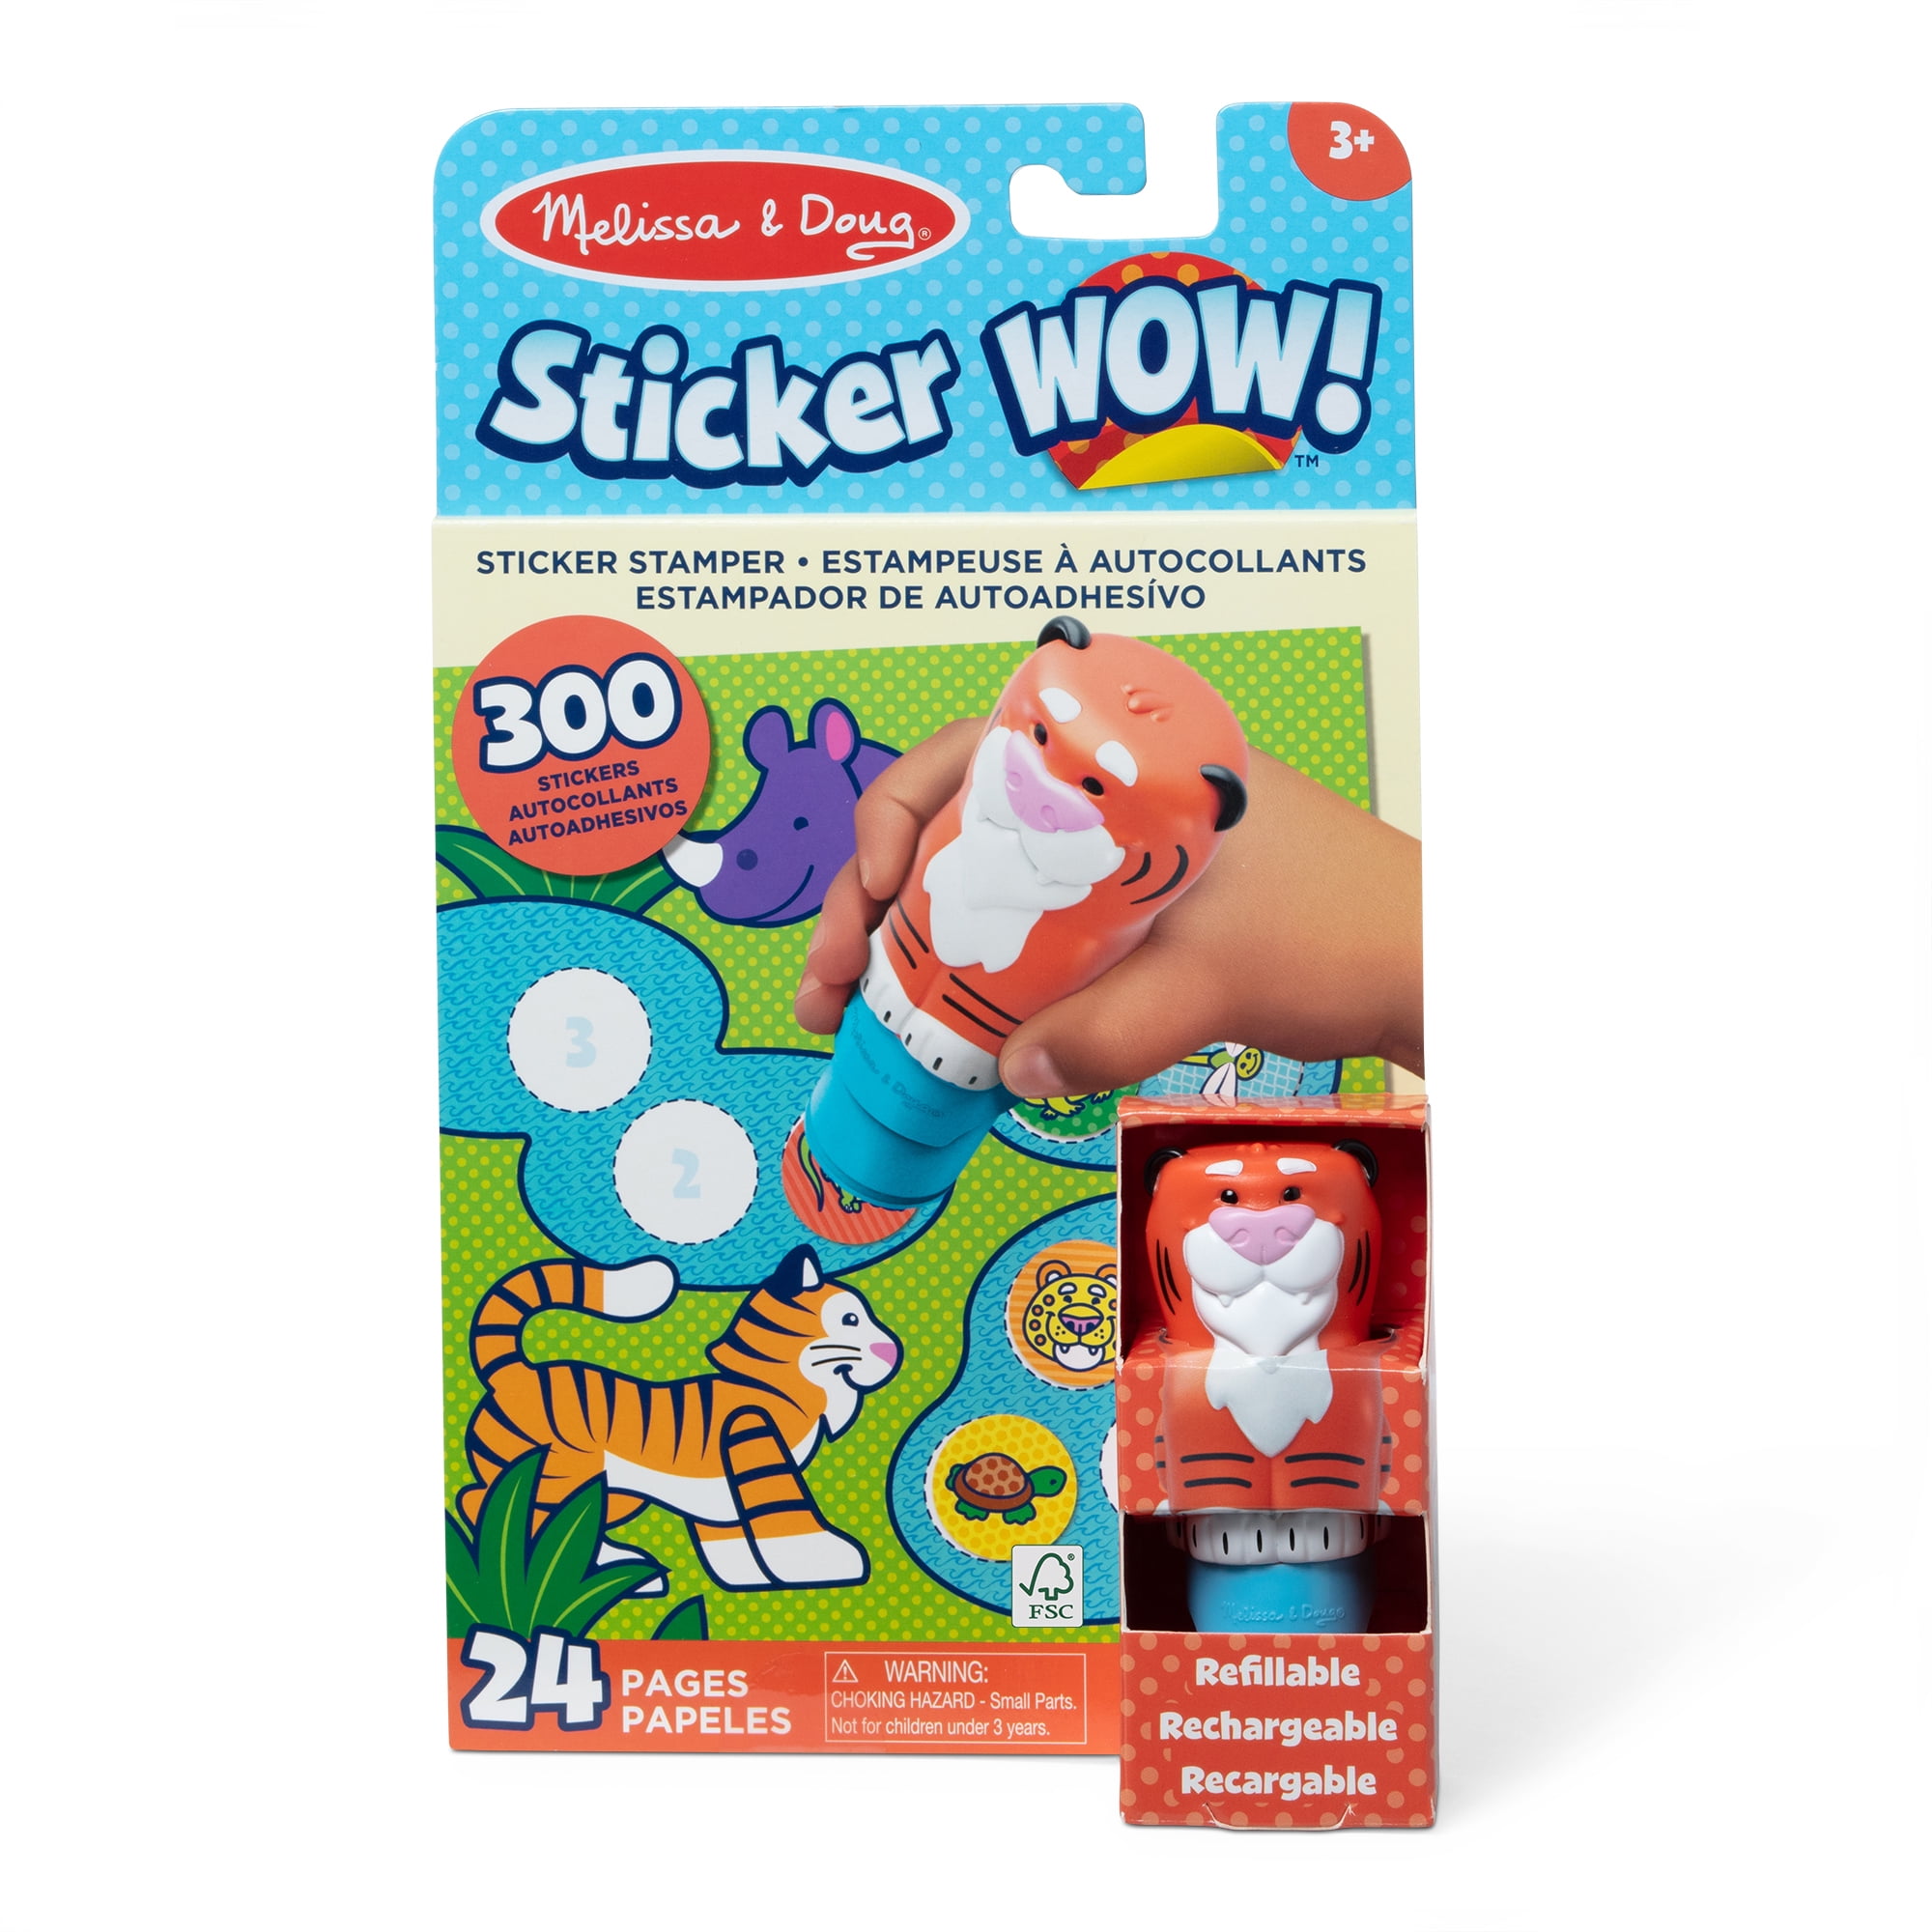 Melissa & Doug Sticker WOW!™ 24-Page Activity Pad and Sticker Stamper, 300  Stickers, Arts and Crafts Fidget Toy Collectible Character – Tiger